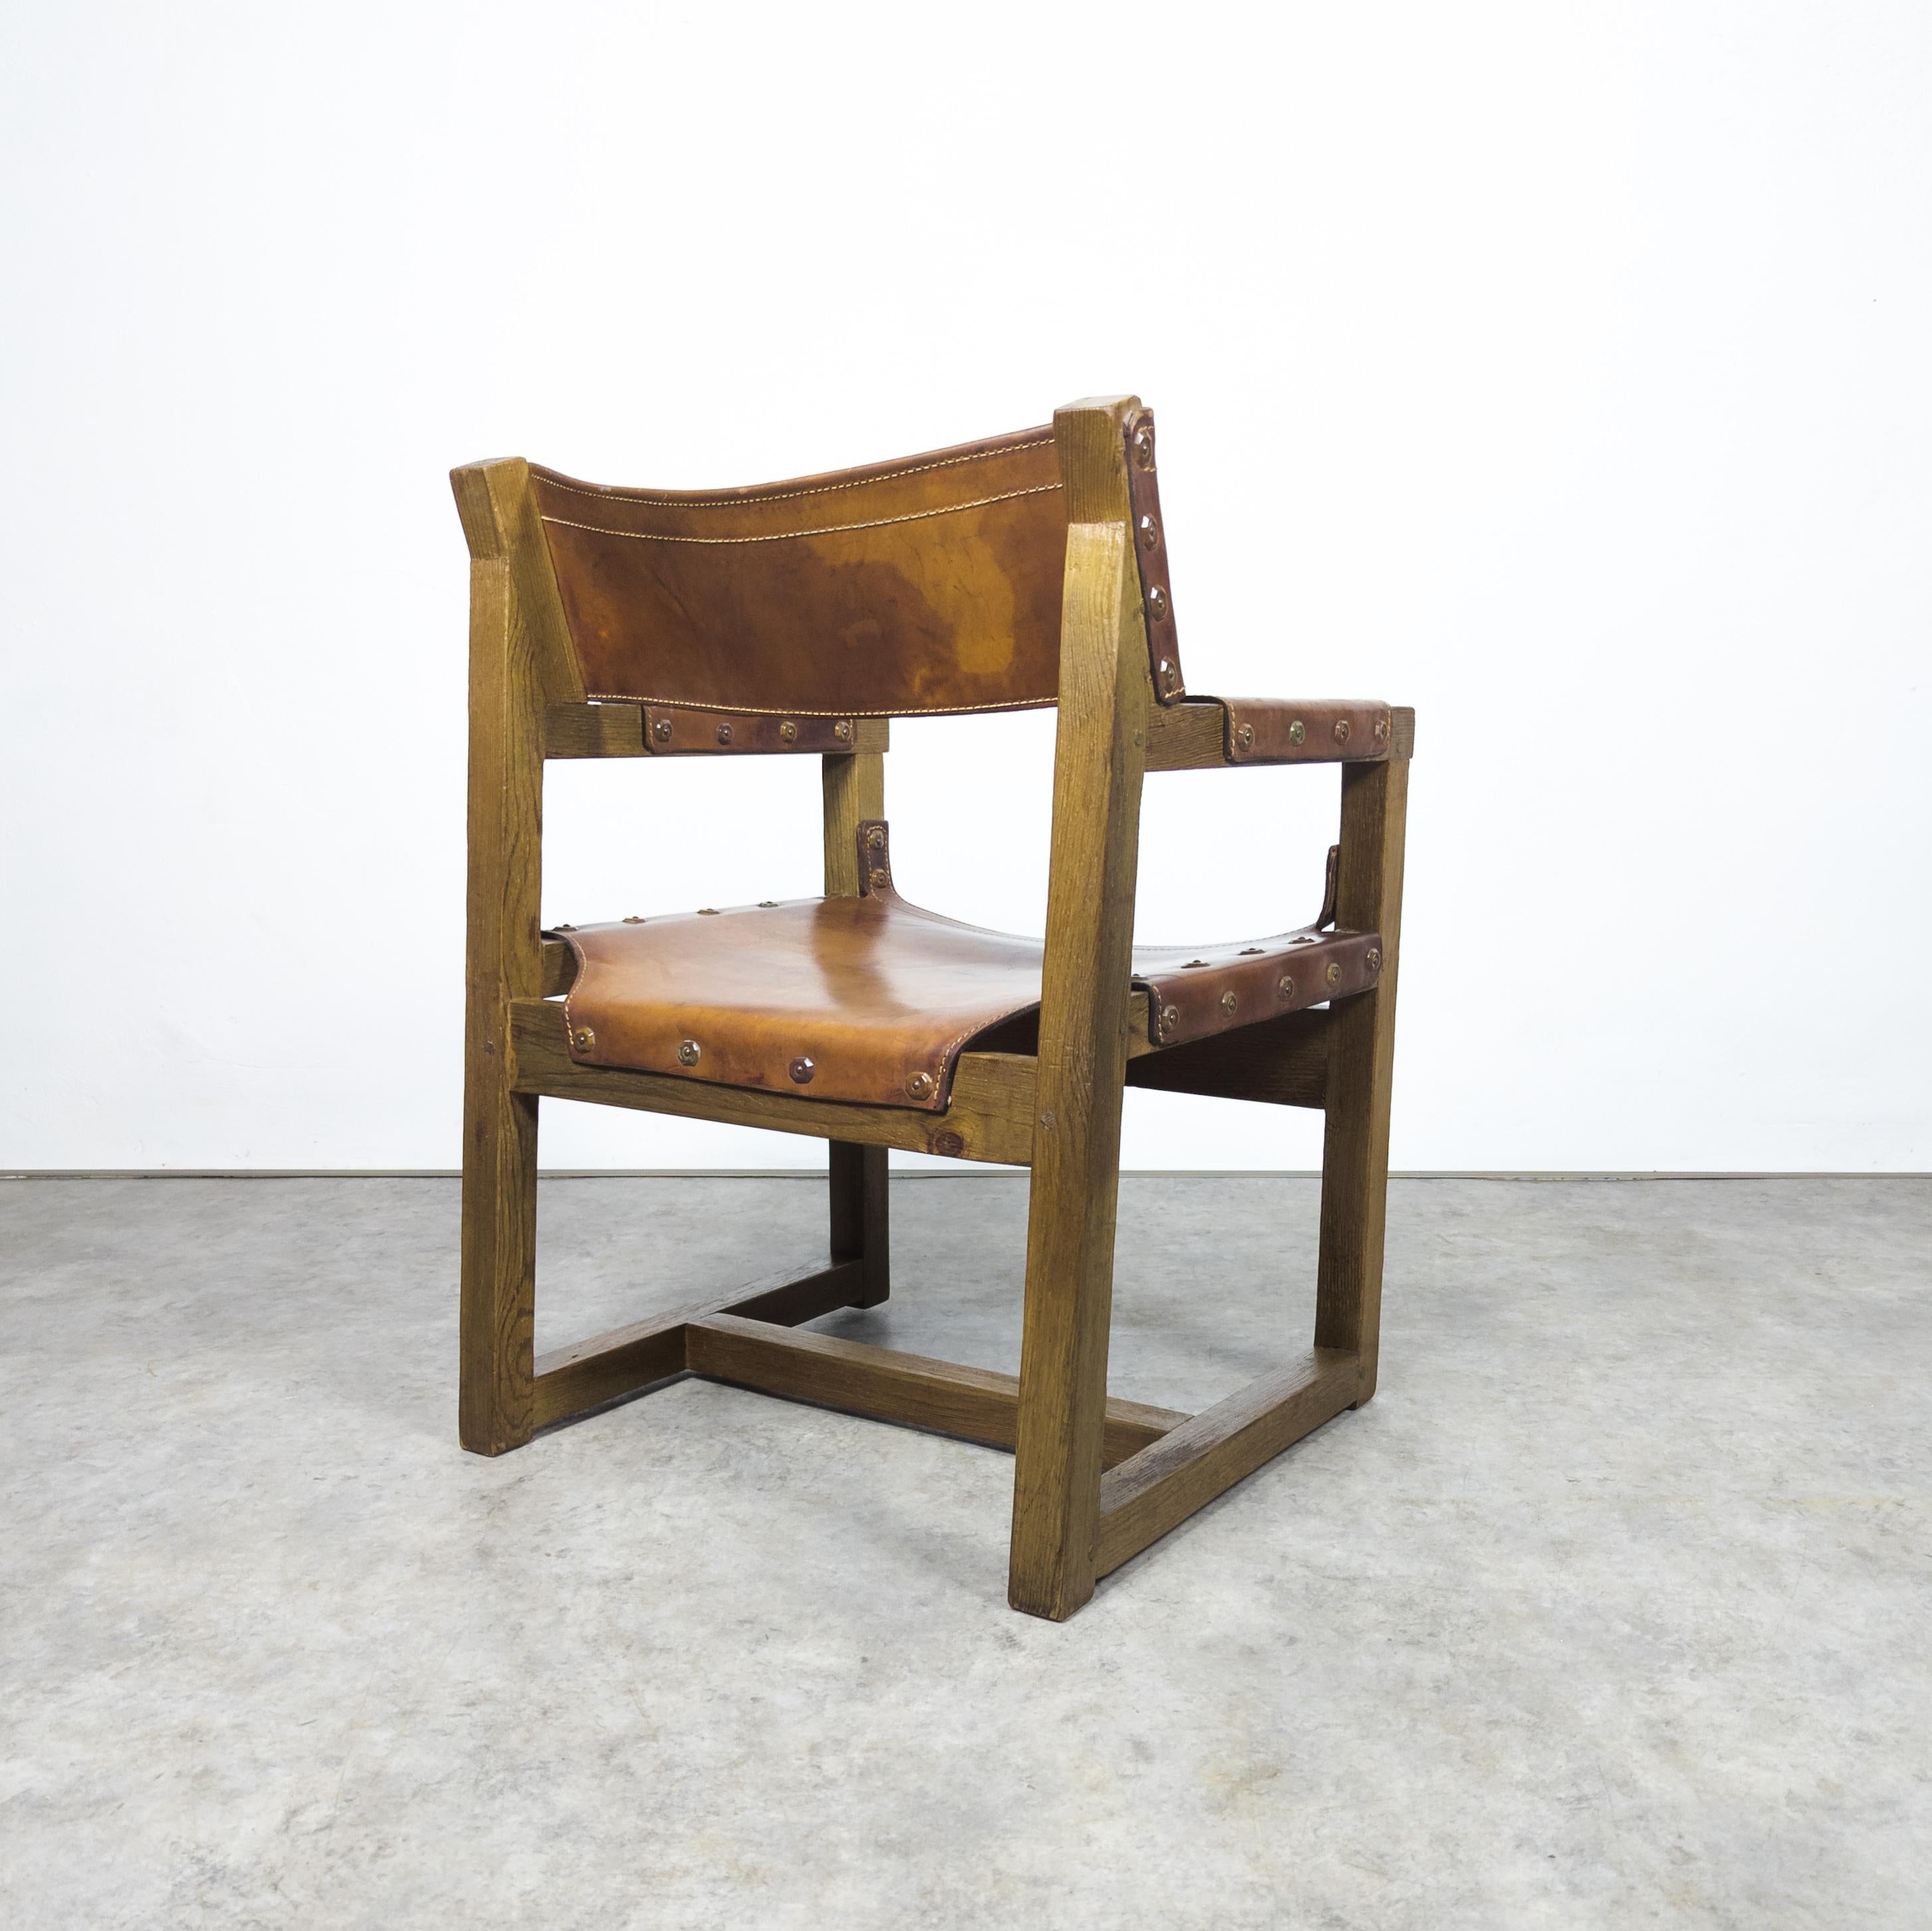 Mid-20th Century Rare brutalist leather armchair by Biosca, Spain 1950s For Sale